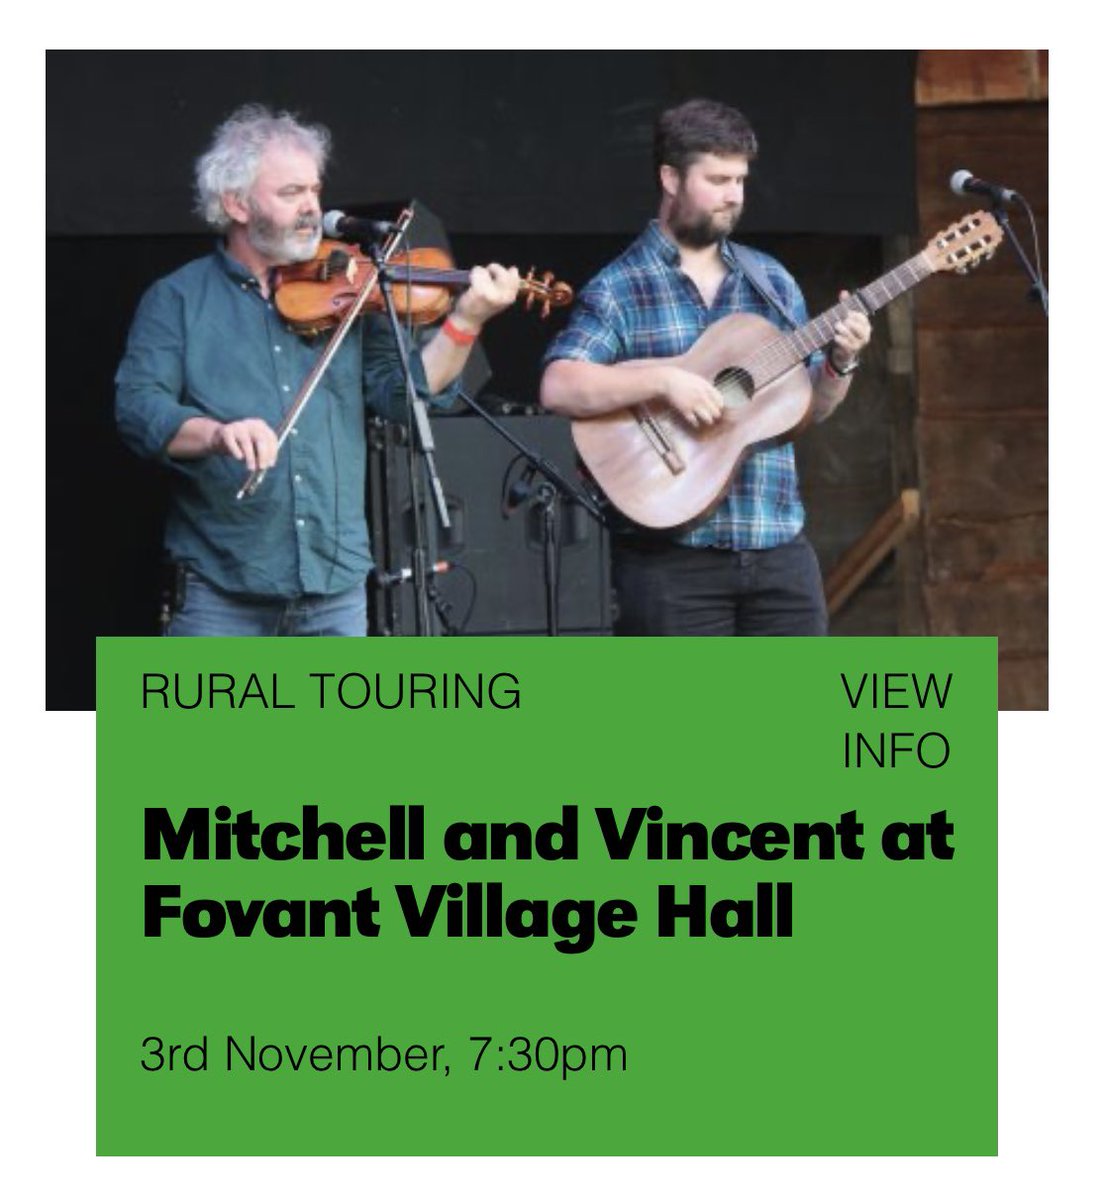 TONIGHT!

@mitchellandvin @mitchellandvinc are performing in #Fovant near #Sailsbury

🎫&details➡️ poundarts.org.uk/whats-on/mitch…

This event is in association with @poundarts rural touring.

#ruraltouring #whatsonwiltshire #livemusic #music #folkmusic #gig #concert #folkduo